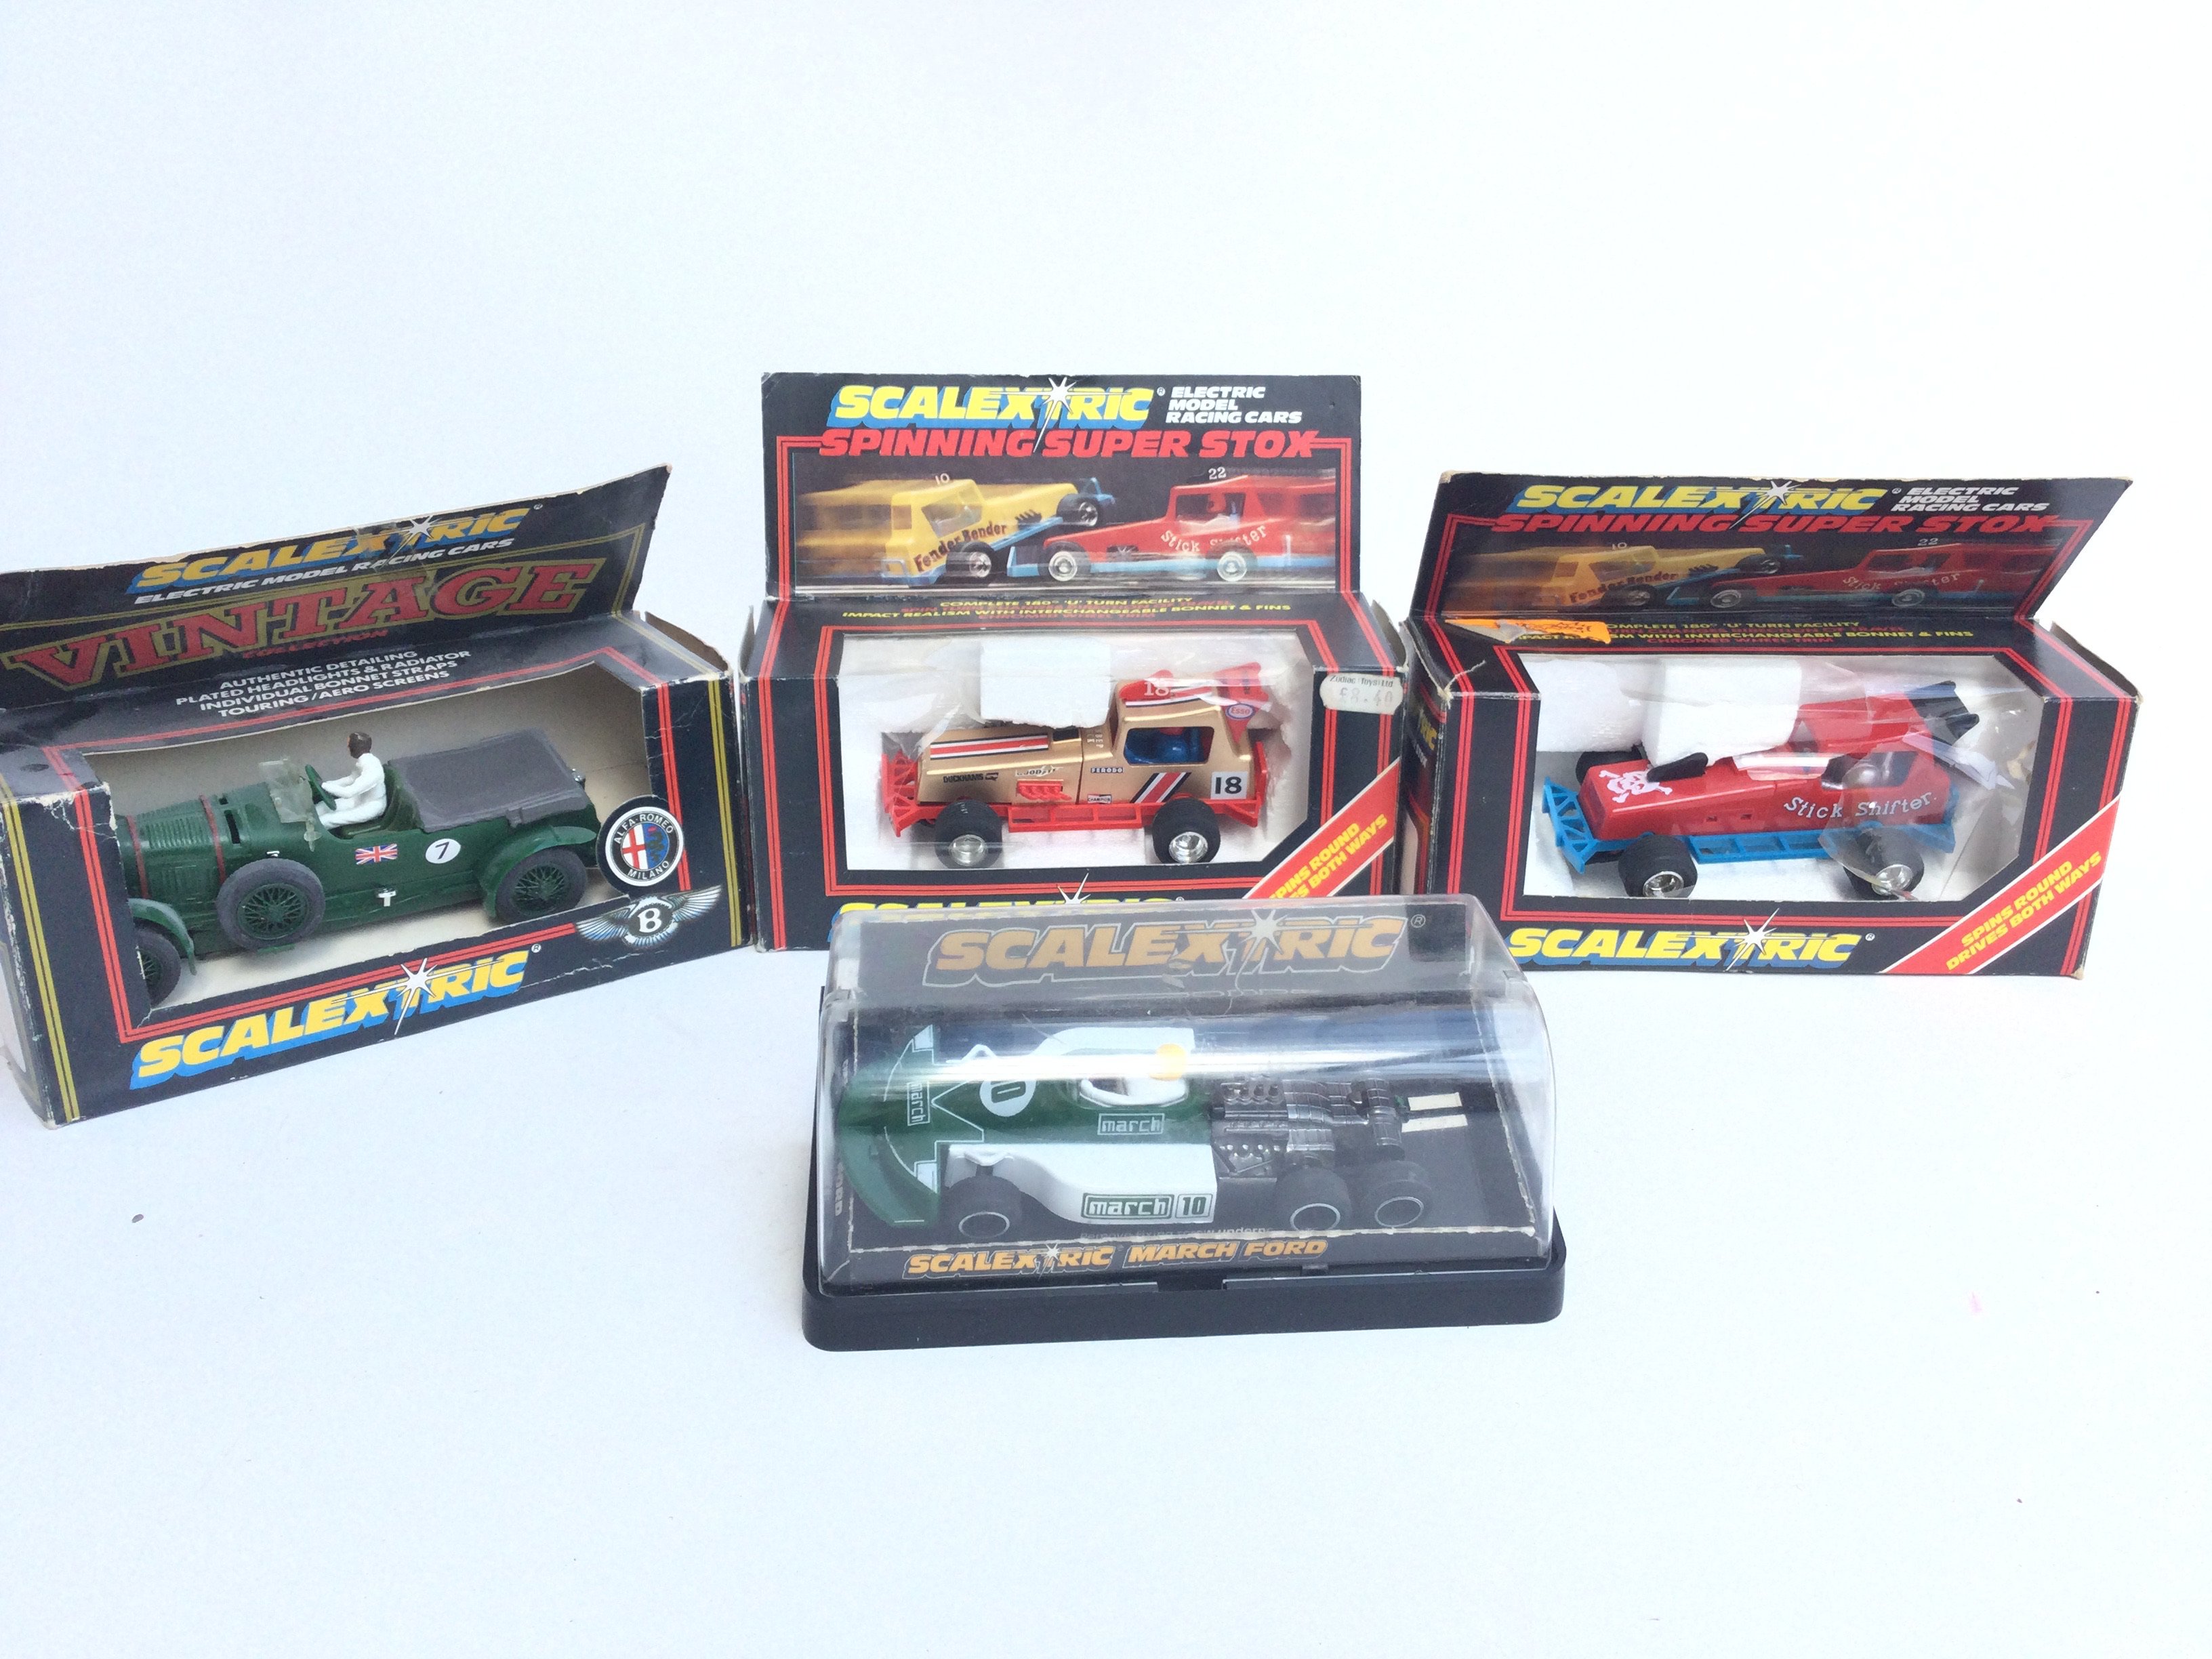 4 X Boxed Scalextric Cars including 2 X Spinning S